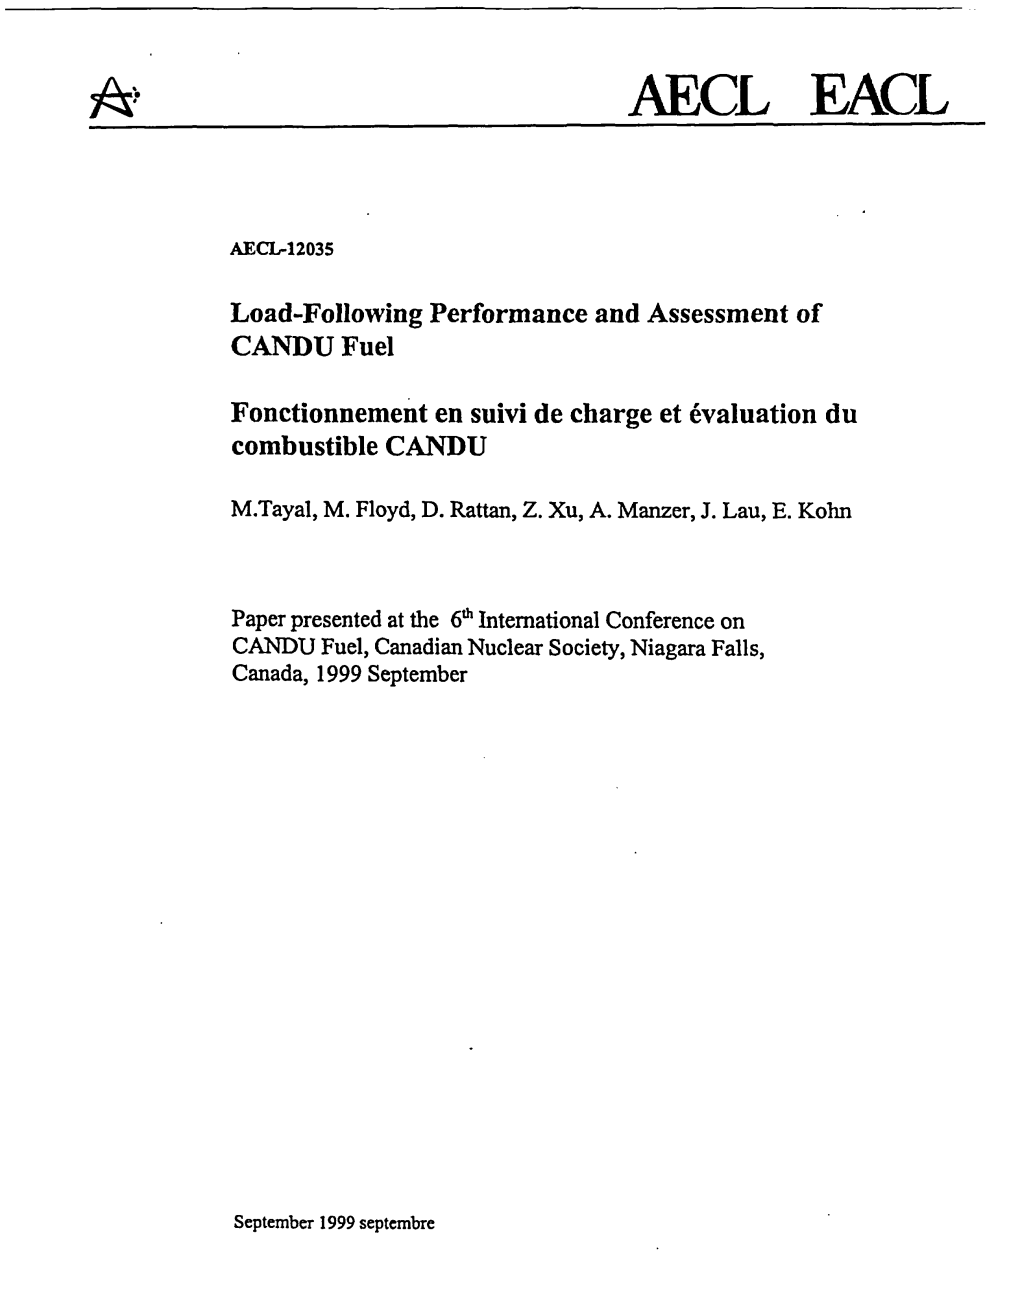 Load-Following Performance and Assessment of CANDU Fuel